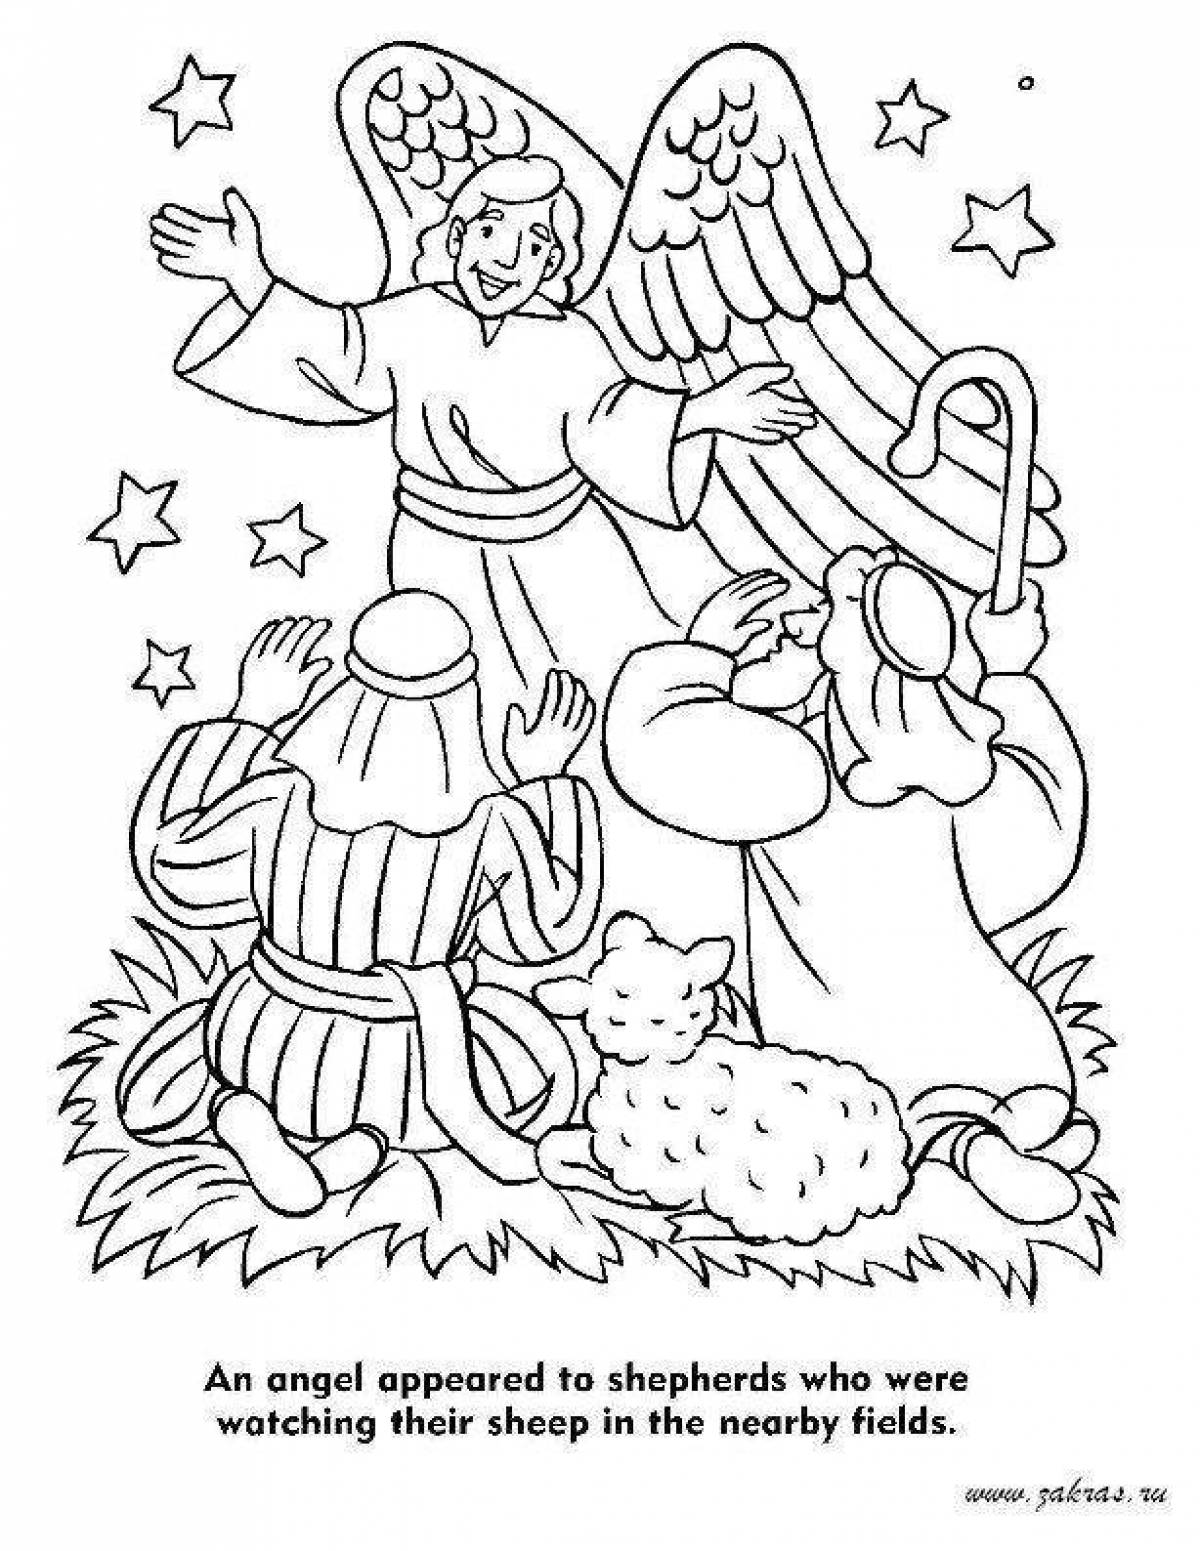 Christmas playful coloring for Sunday school kids